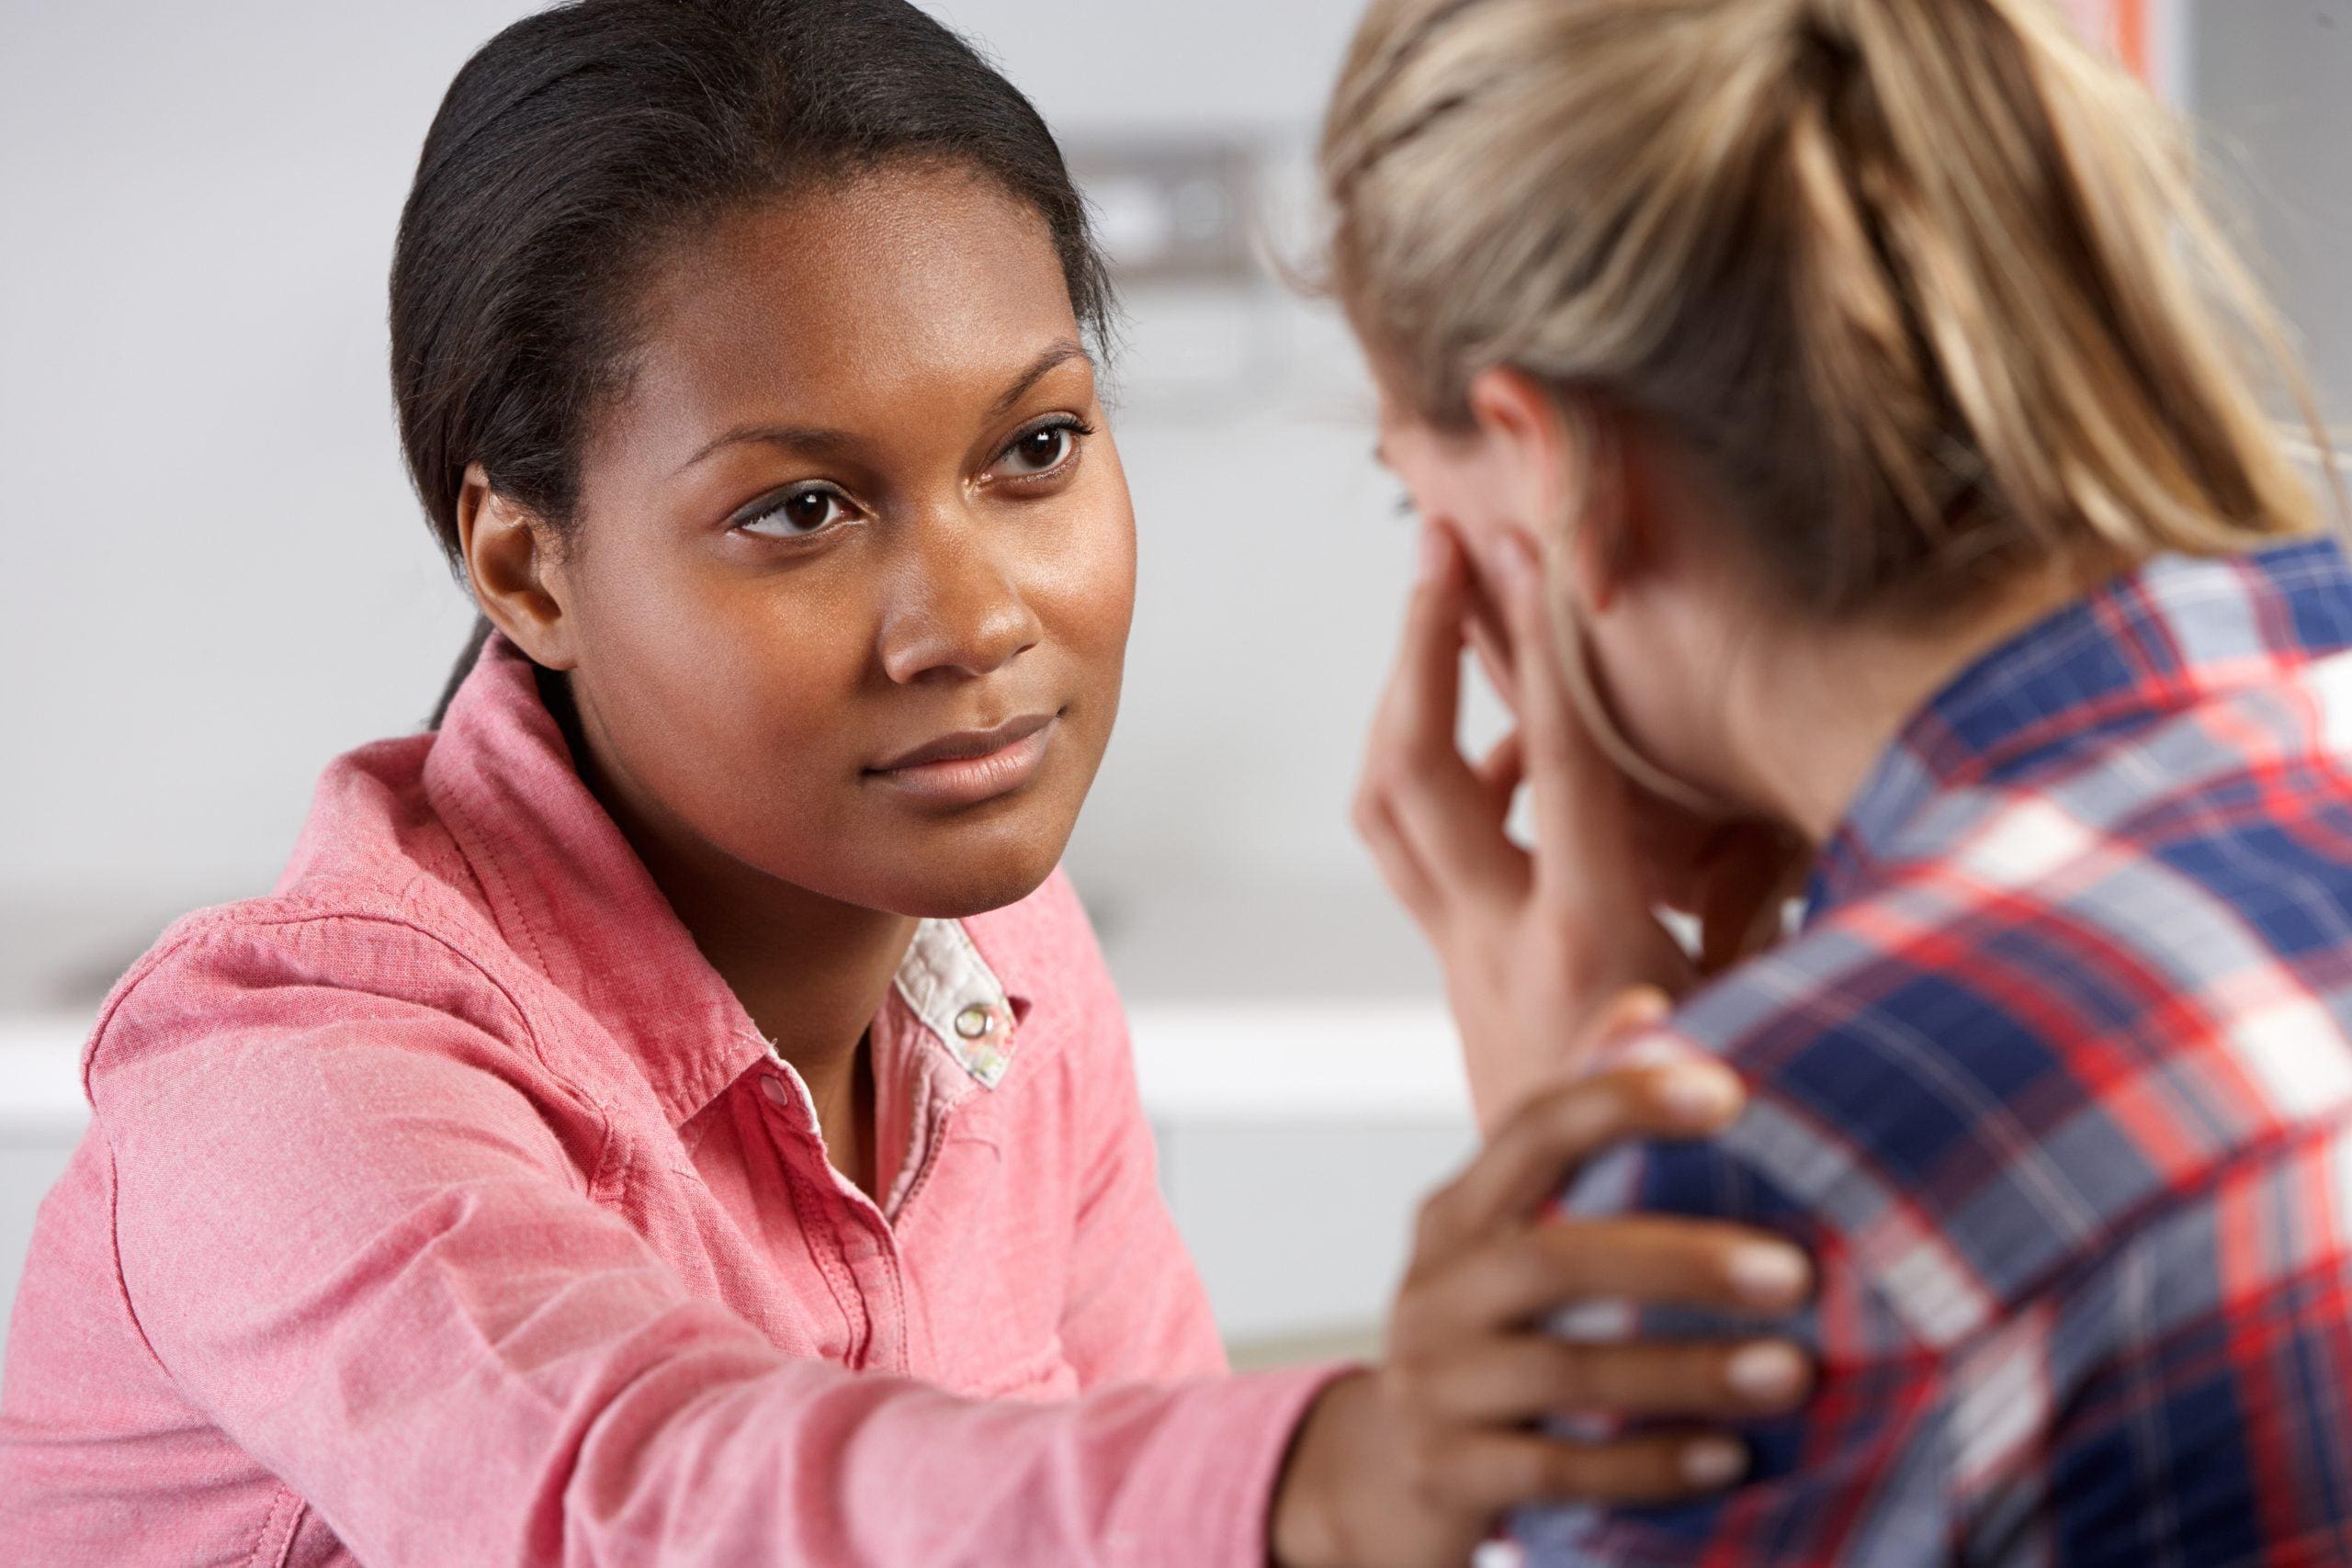 An image of a woman offering mental illness help to a friend